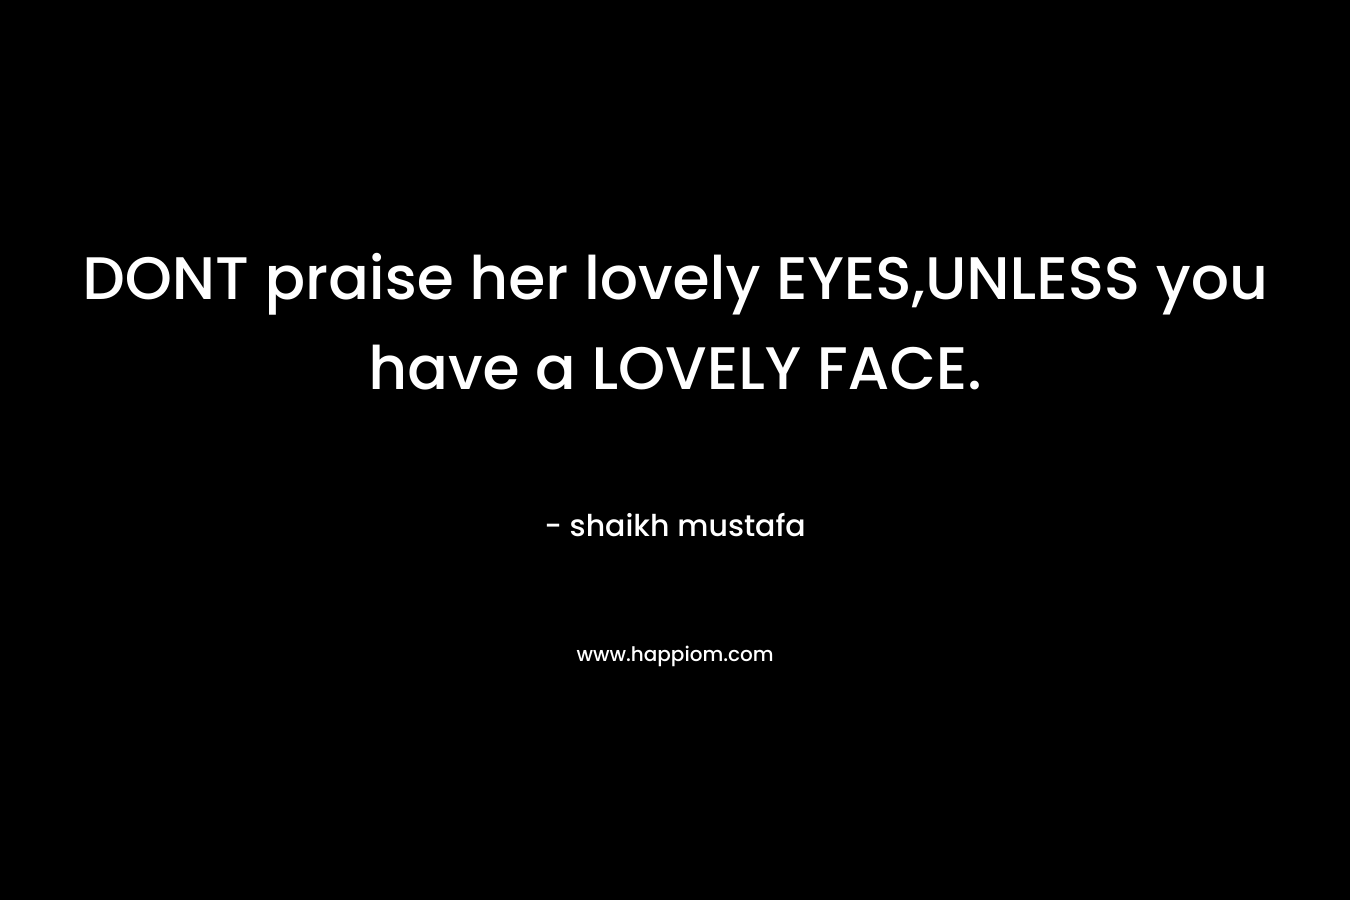 DONT praise her lovely EYES,UNLESS you have a LOVELY FACE.